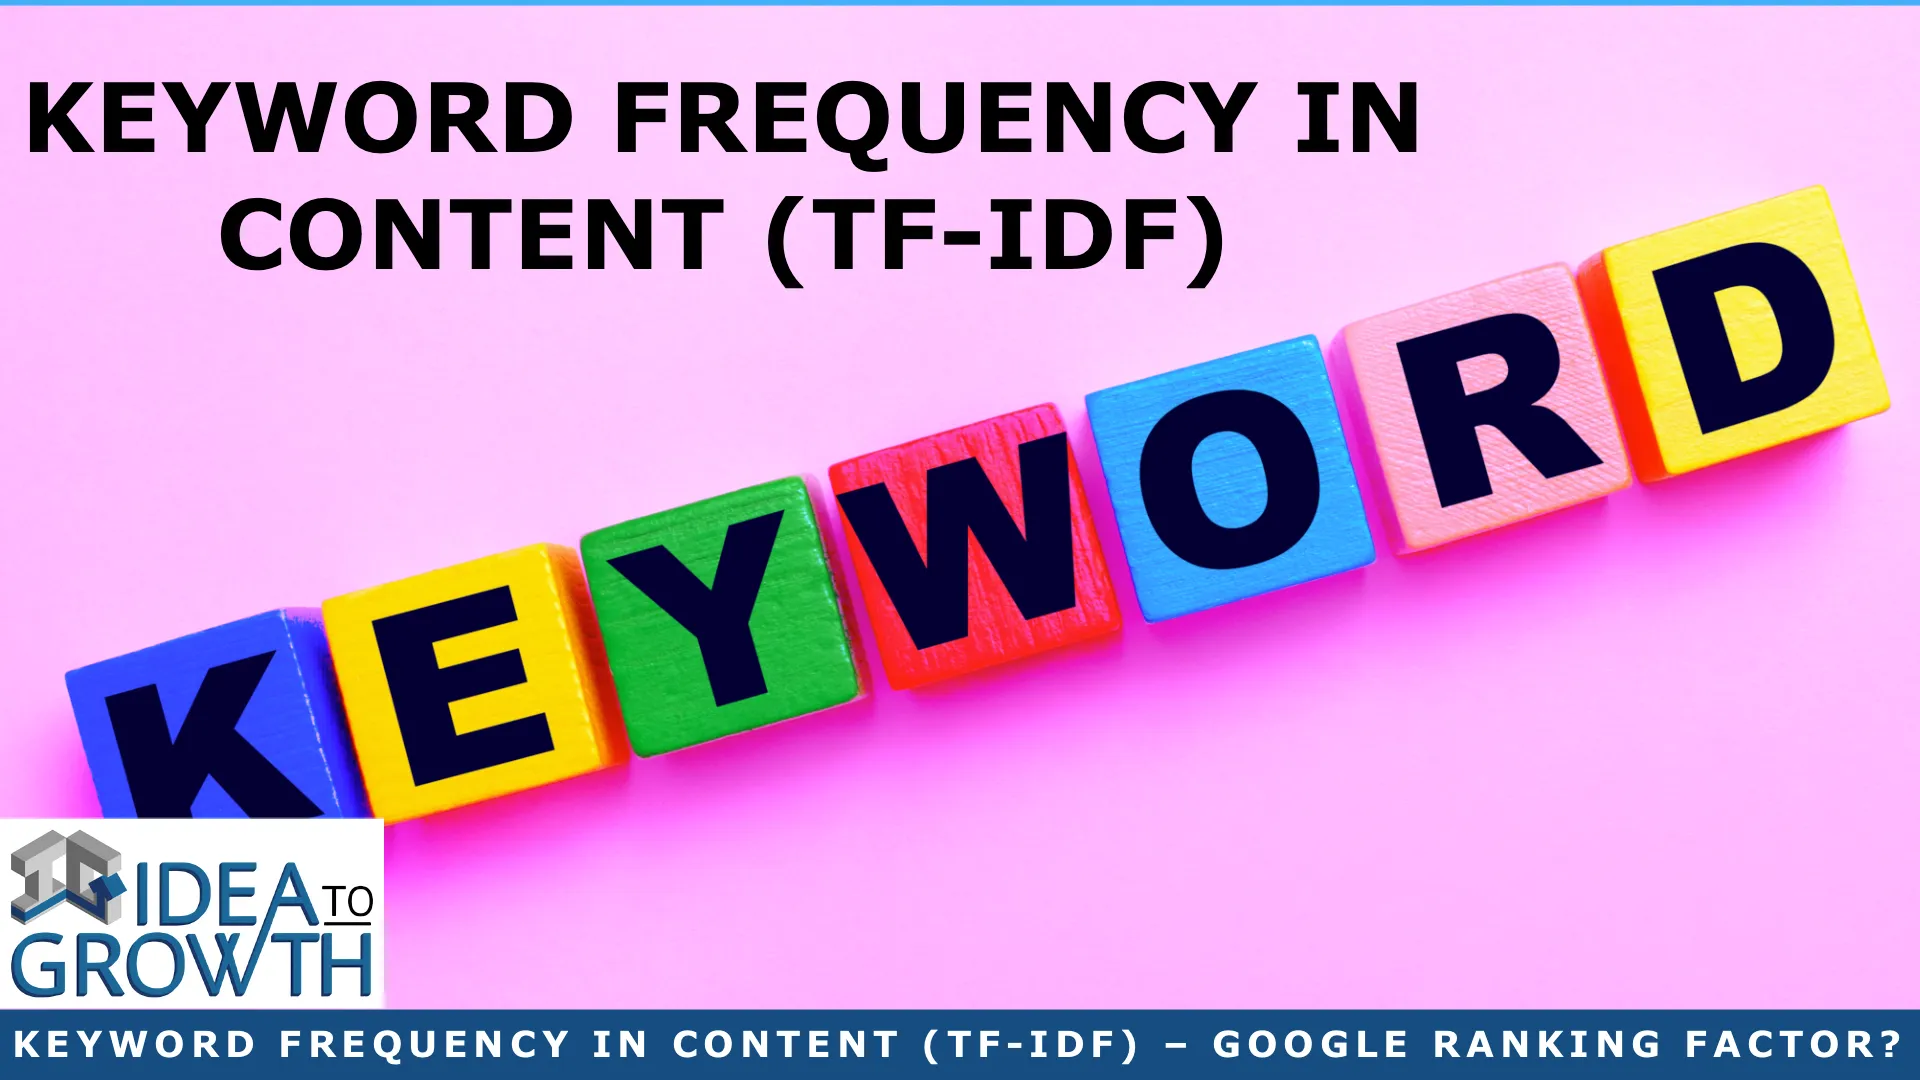 KEYWORD FREQUENCY IN CONTENT (TF-IDF) – GOOGLE RANKING FACTOR?